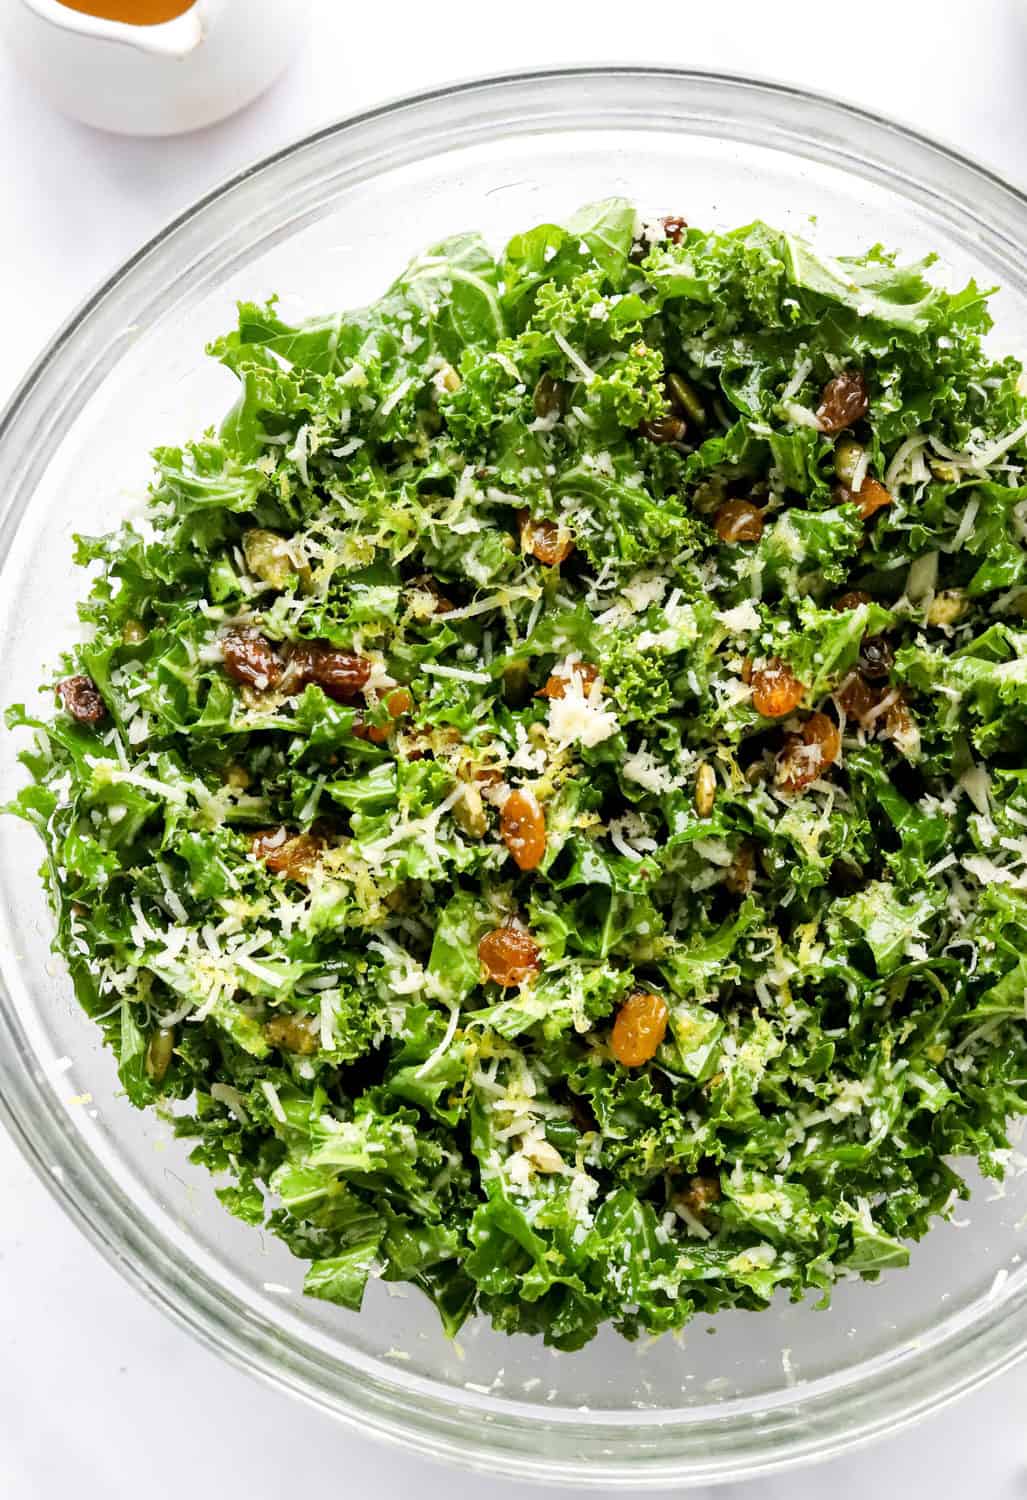 Mixed up salad with kale and topped with parmesan cheese, nut and lemon zest